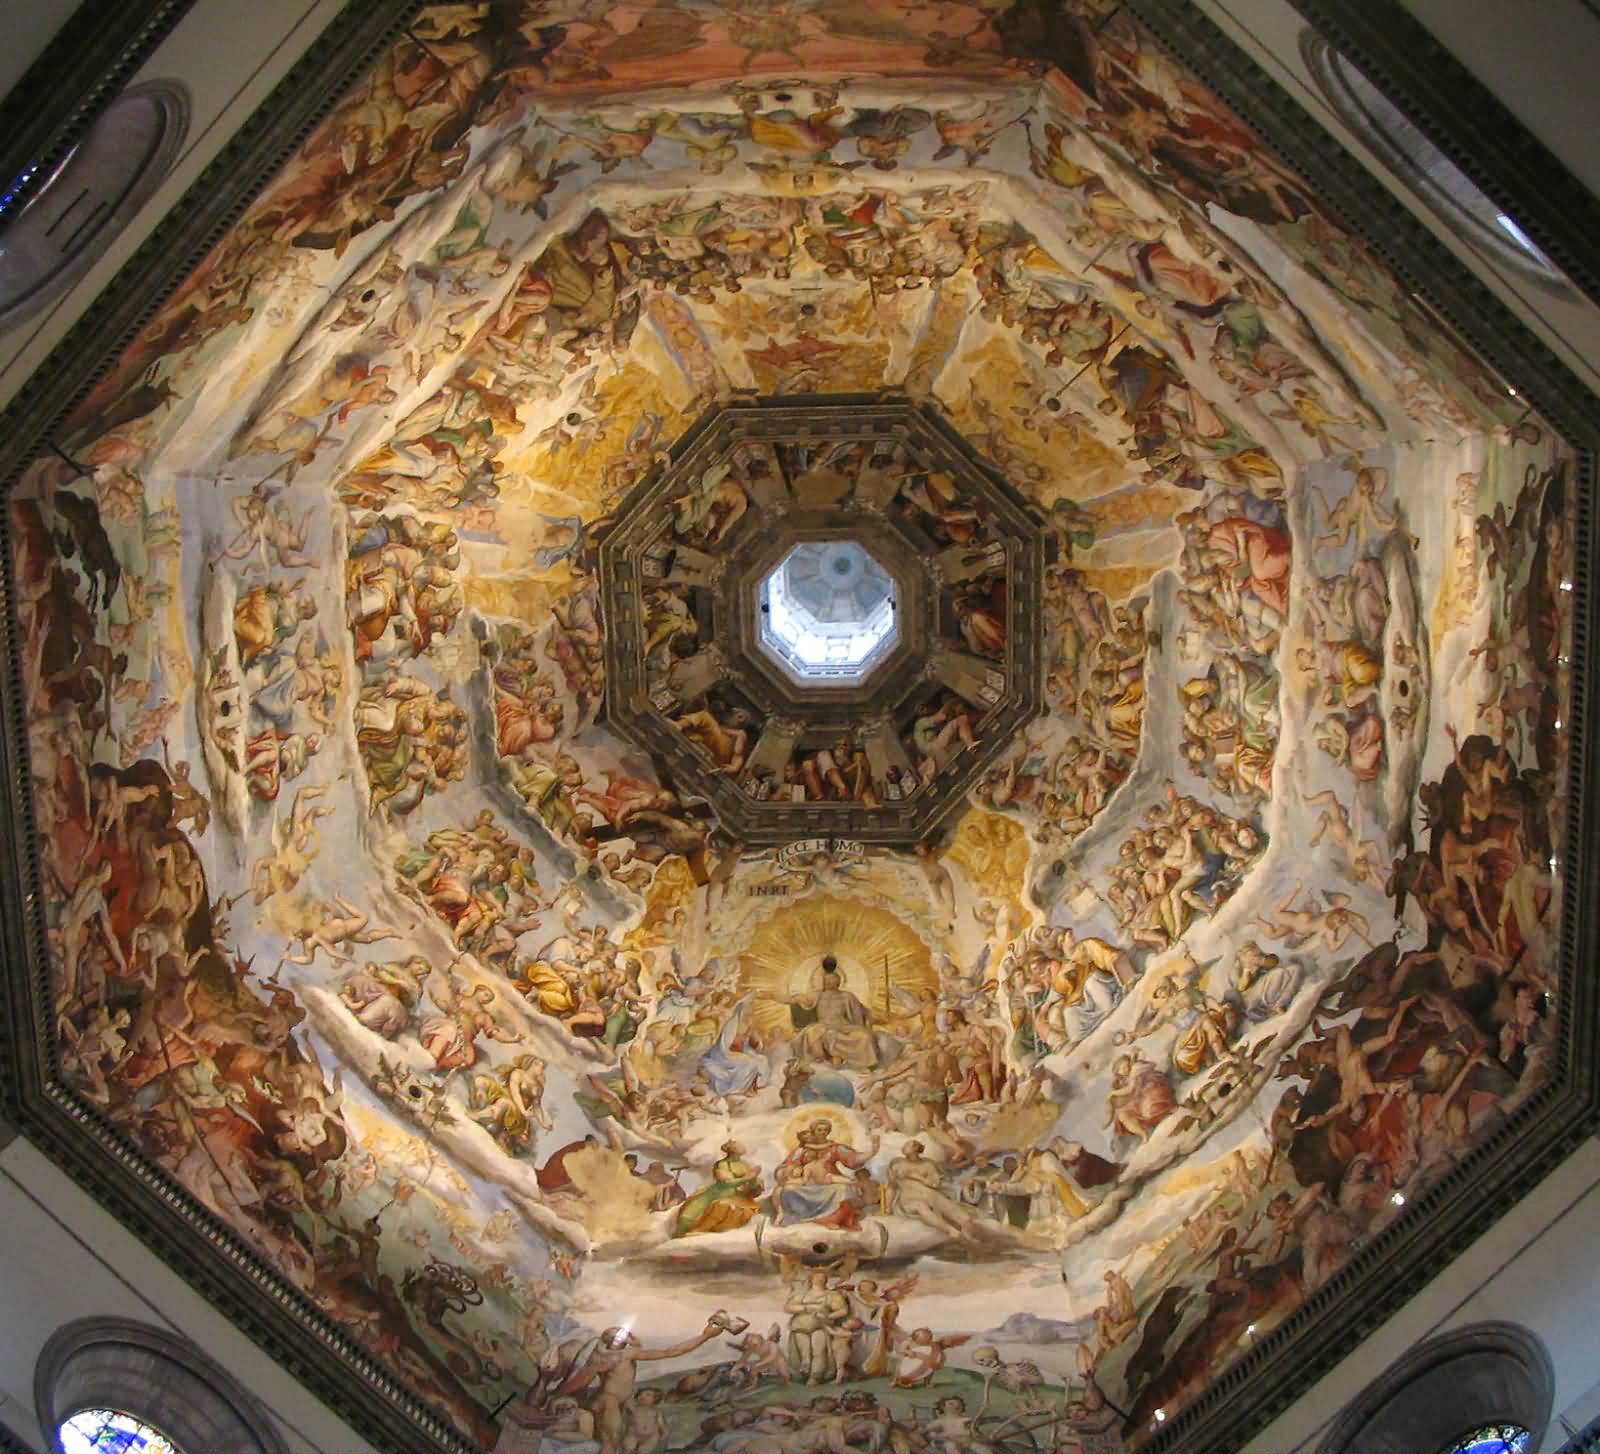 Adorable Dome Inside The Florence Cathedral In Florence, Italy